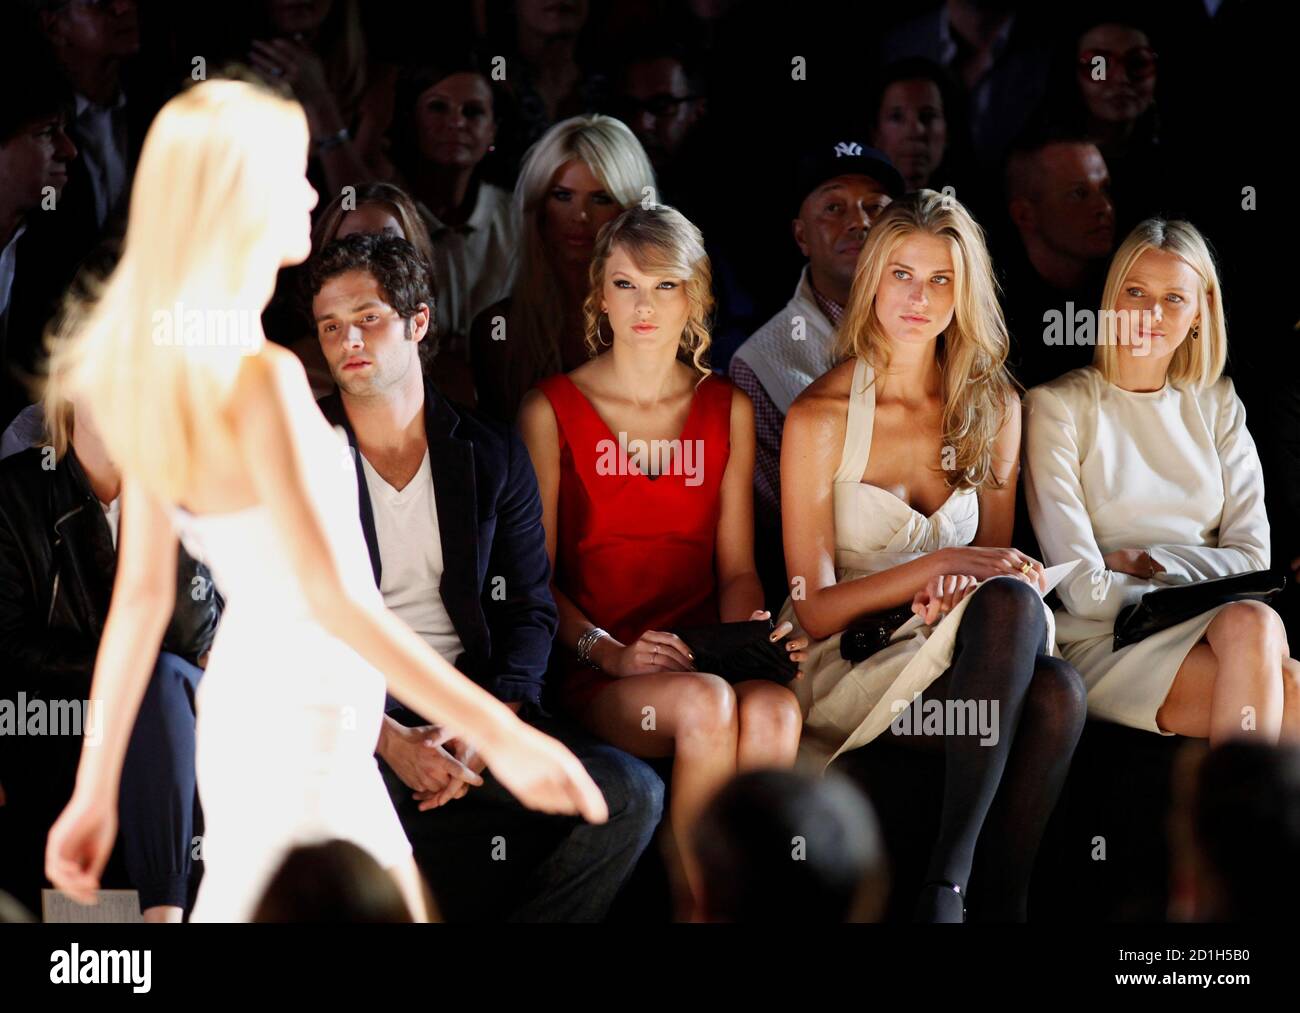 Talje Ride Glæd dig Actor Penn Badgley, singer Taylor Swift, an unidentified guest and actress  Naomi Watts watch the Tommy